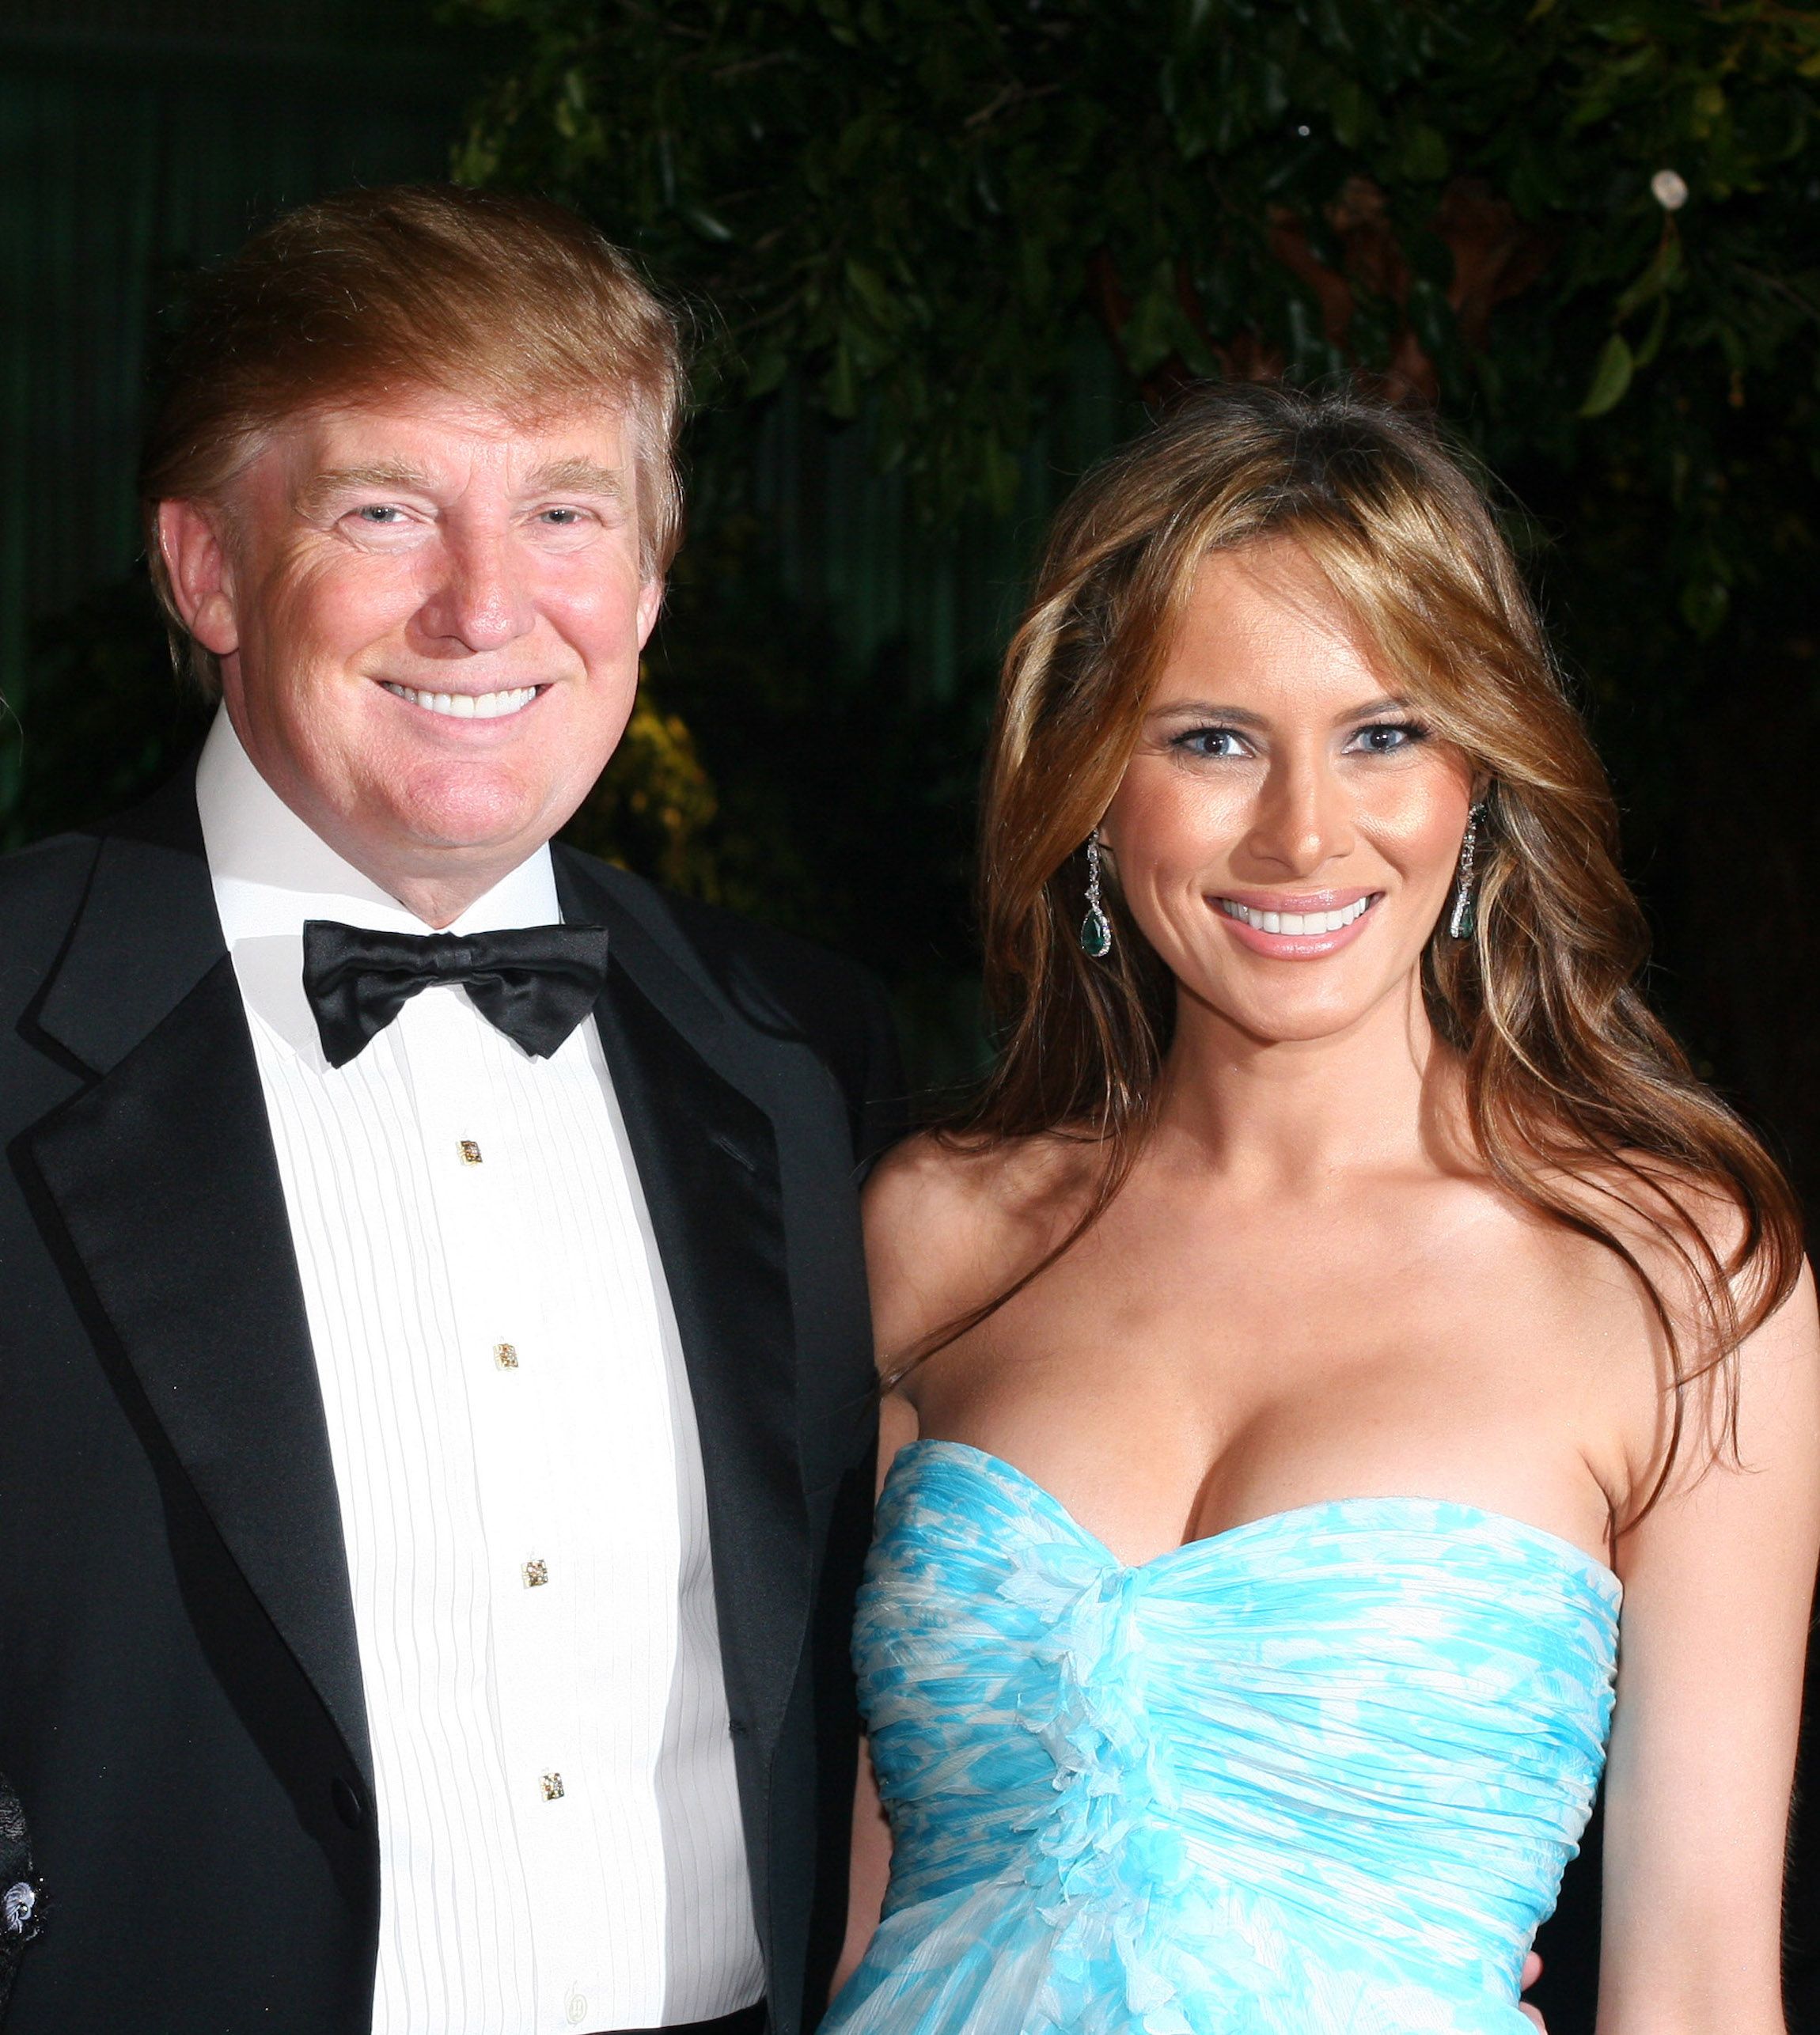 trump-and-melania-wedding-pictures-1611597617.jpg